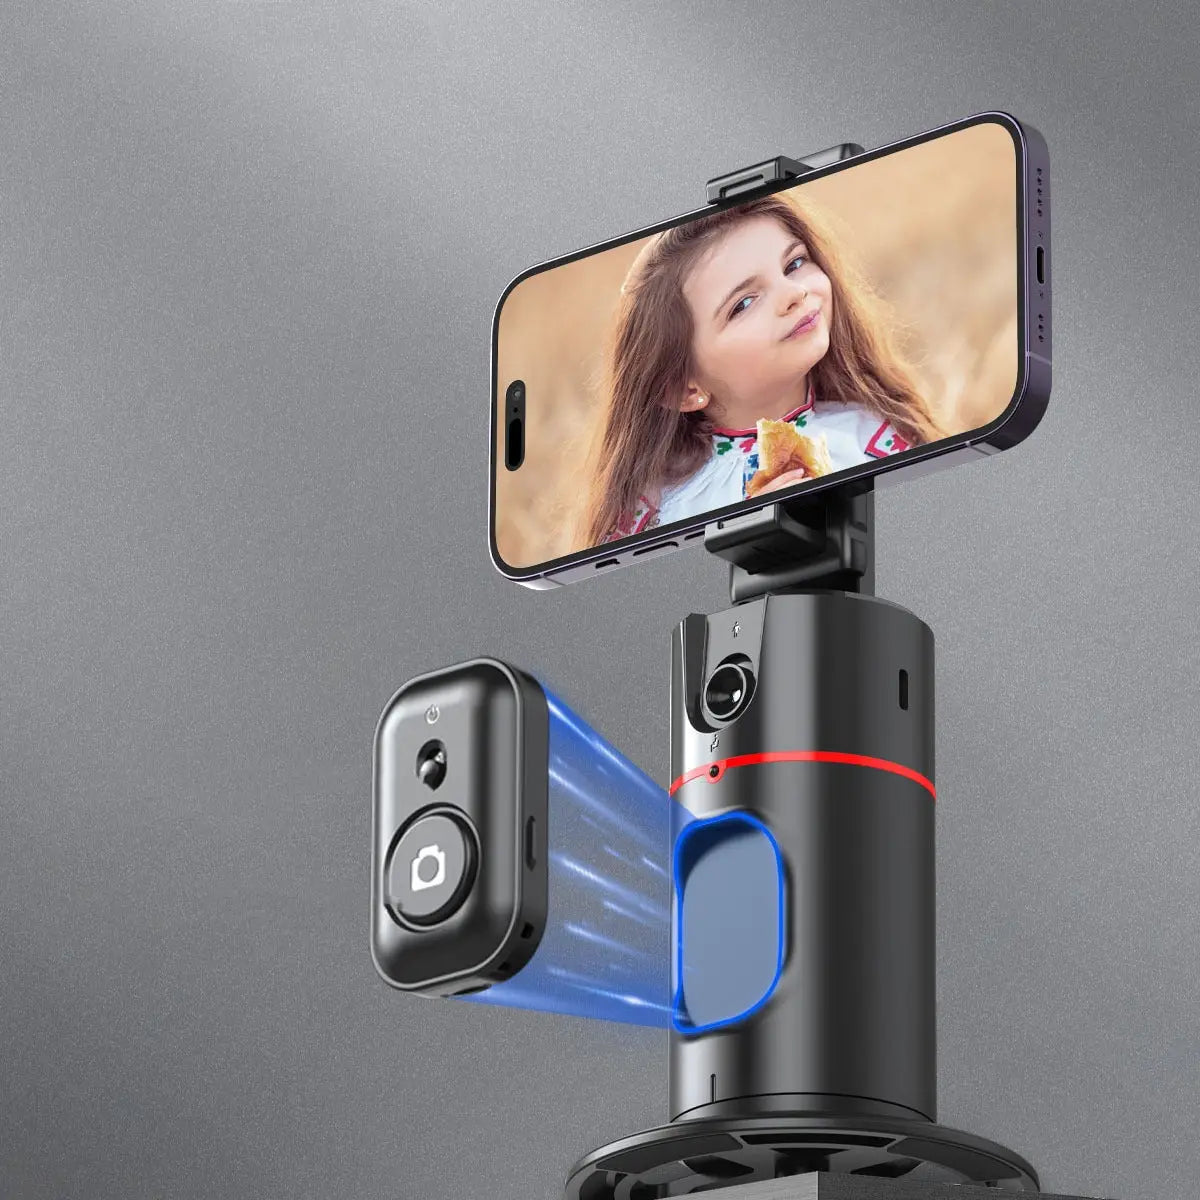 360 Degree Intelligent AI Facial Recognition Tracking And Tracking Stabilizer cj